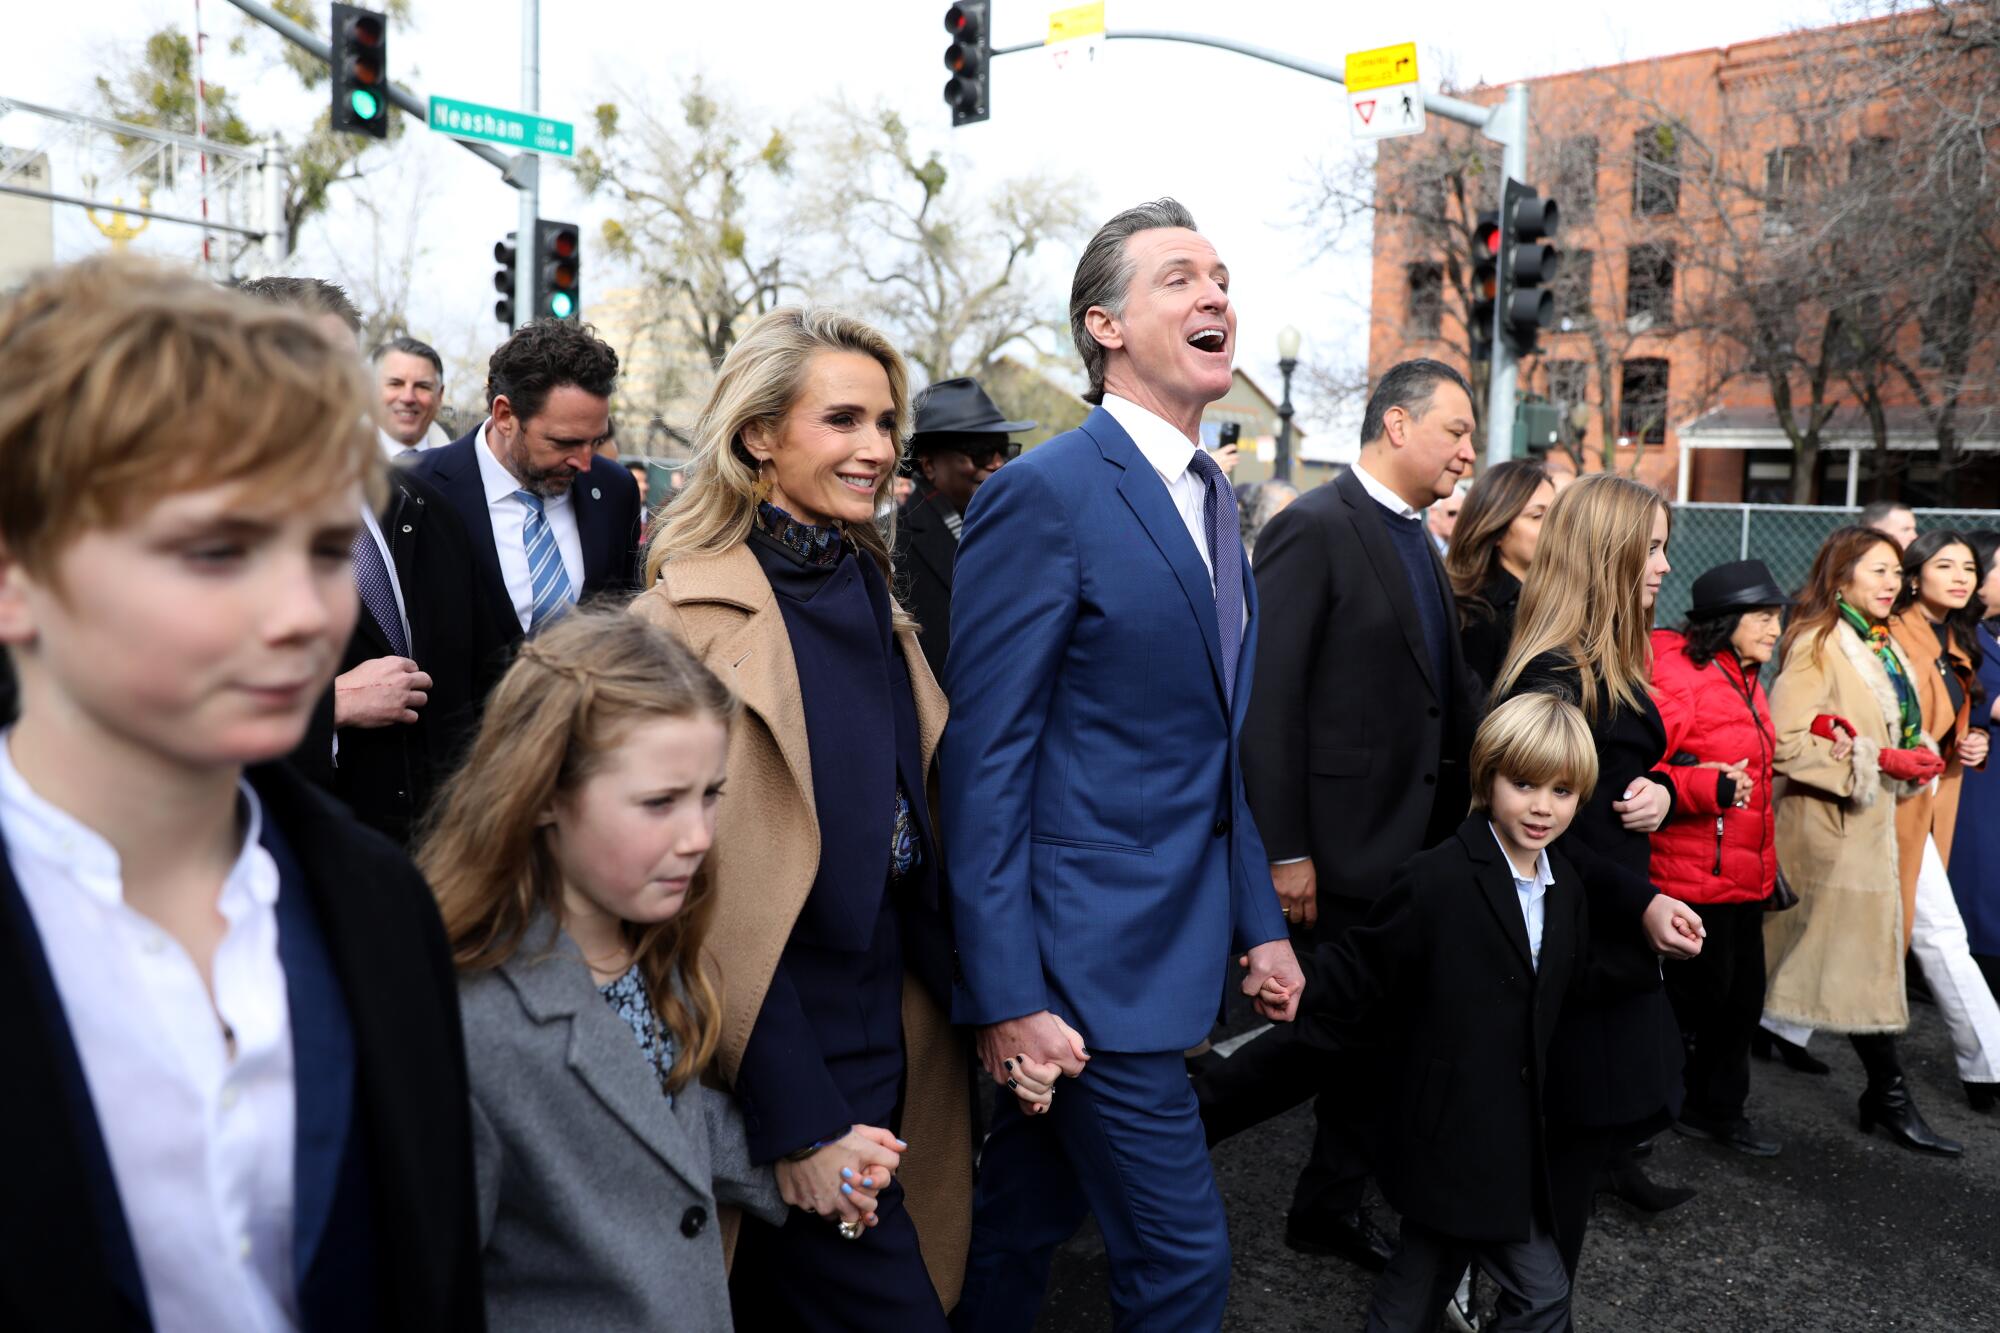 Gov. Gavin Newsom and his family walk with a crowd holding hands.